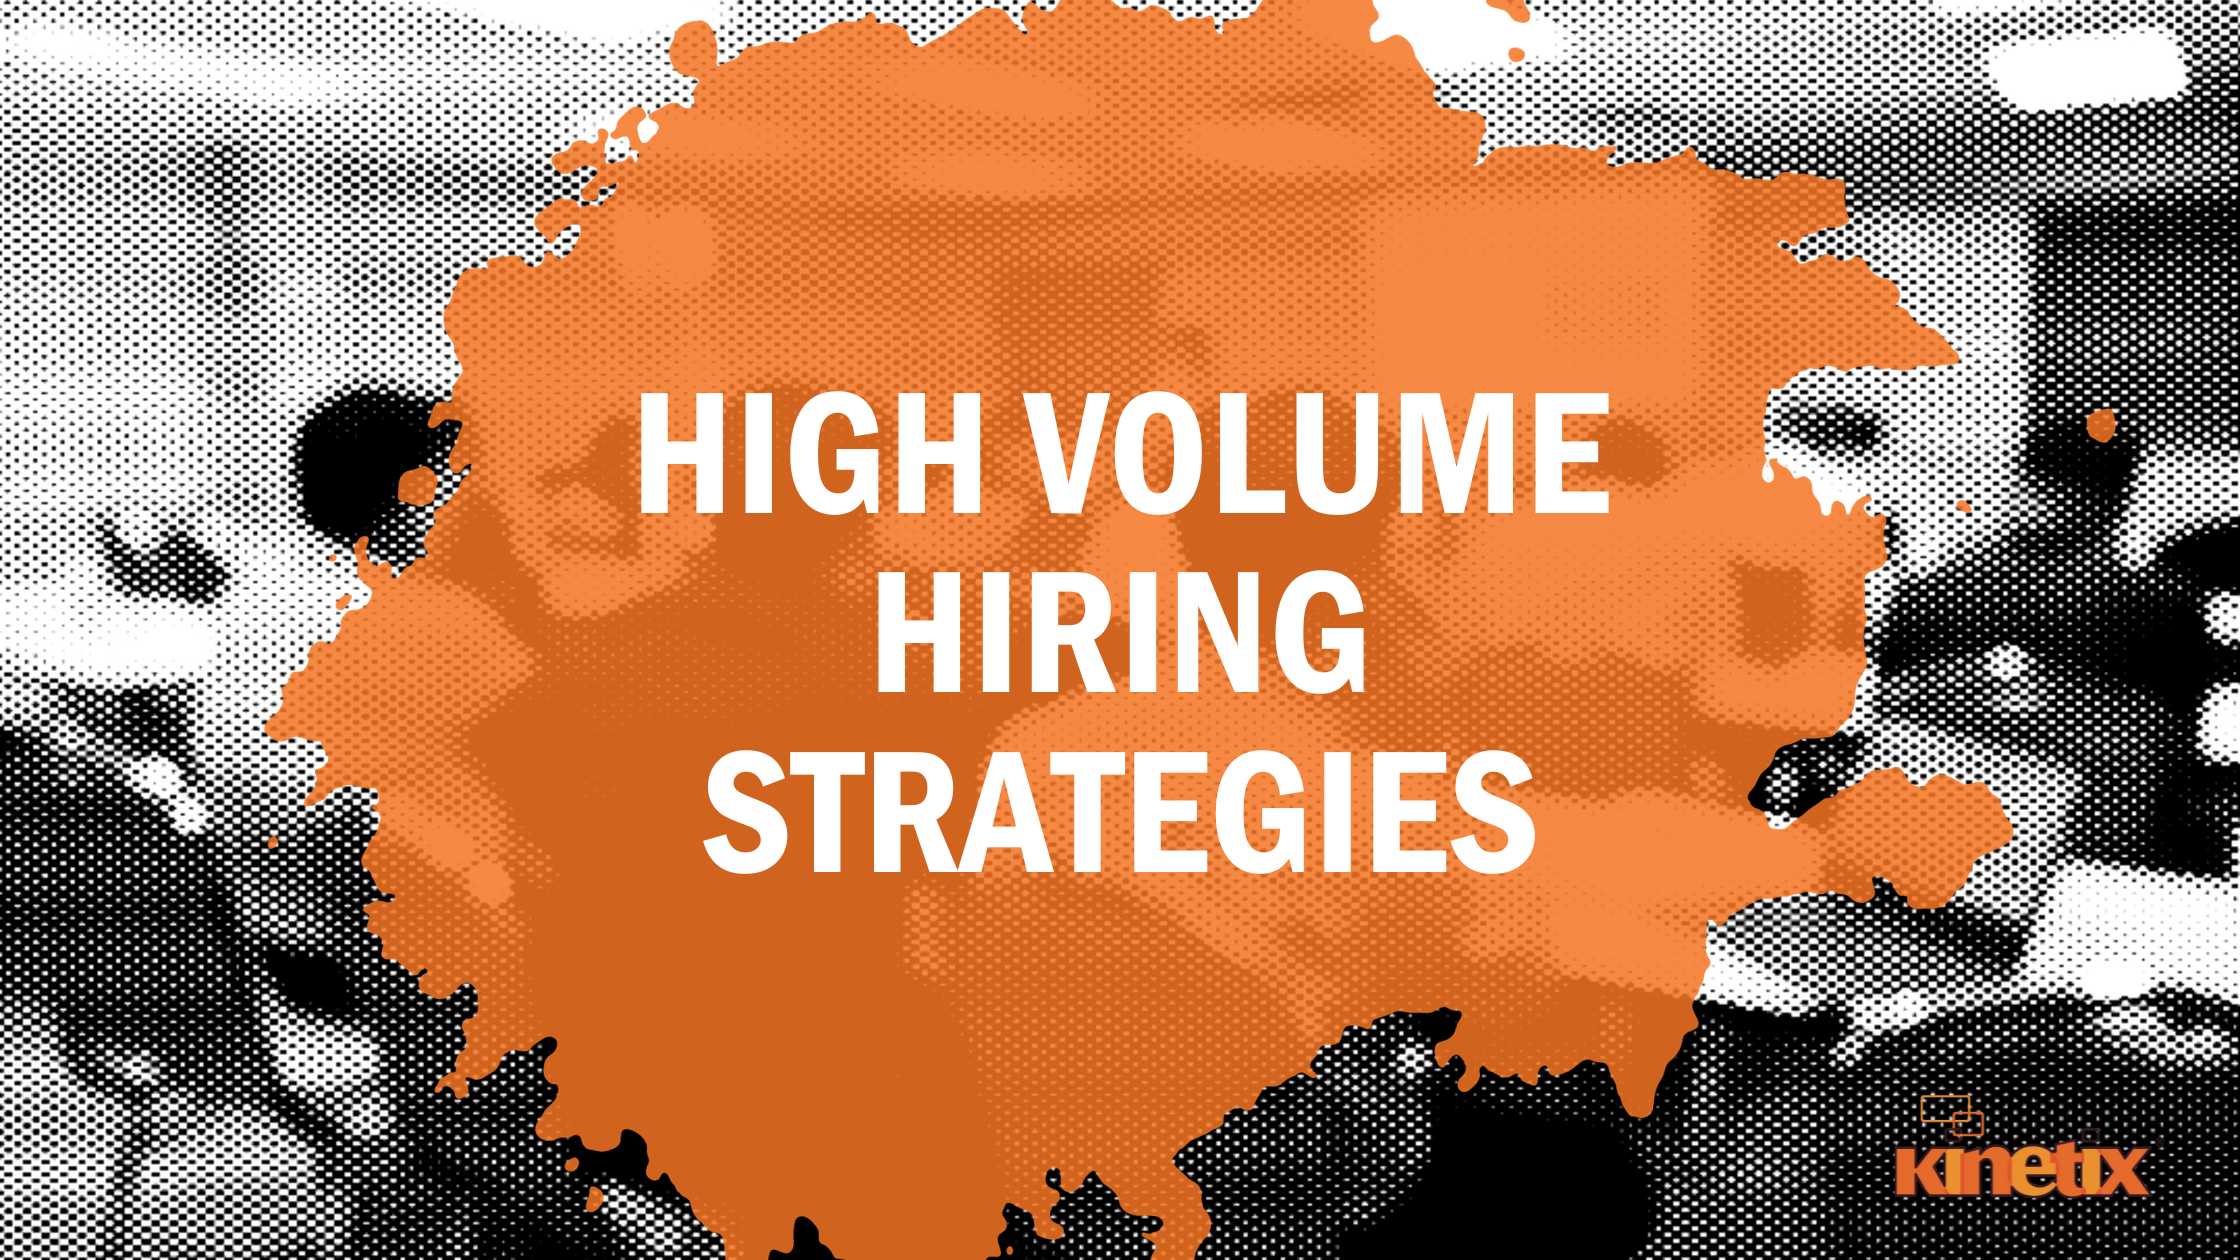 Mastering High-Volume Hiring: The Kinetix Guide to Efficient Talent Acquisition